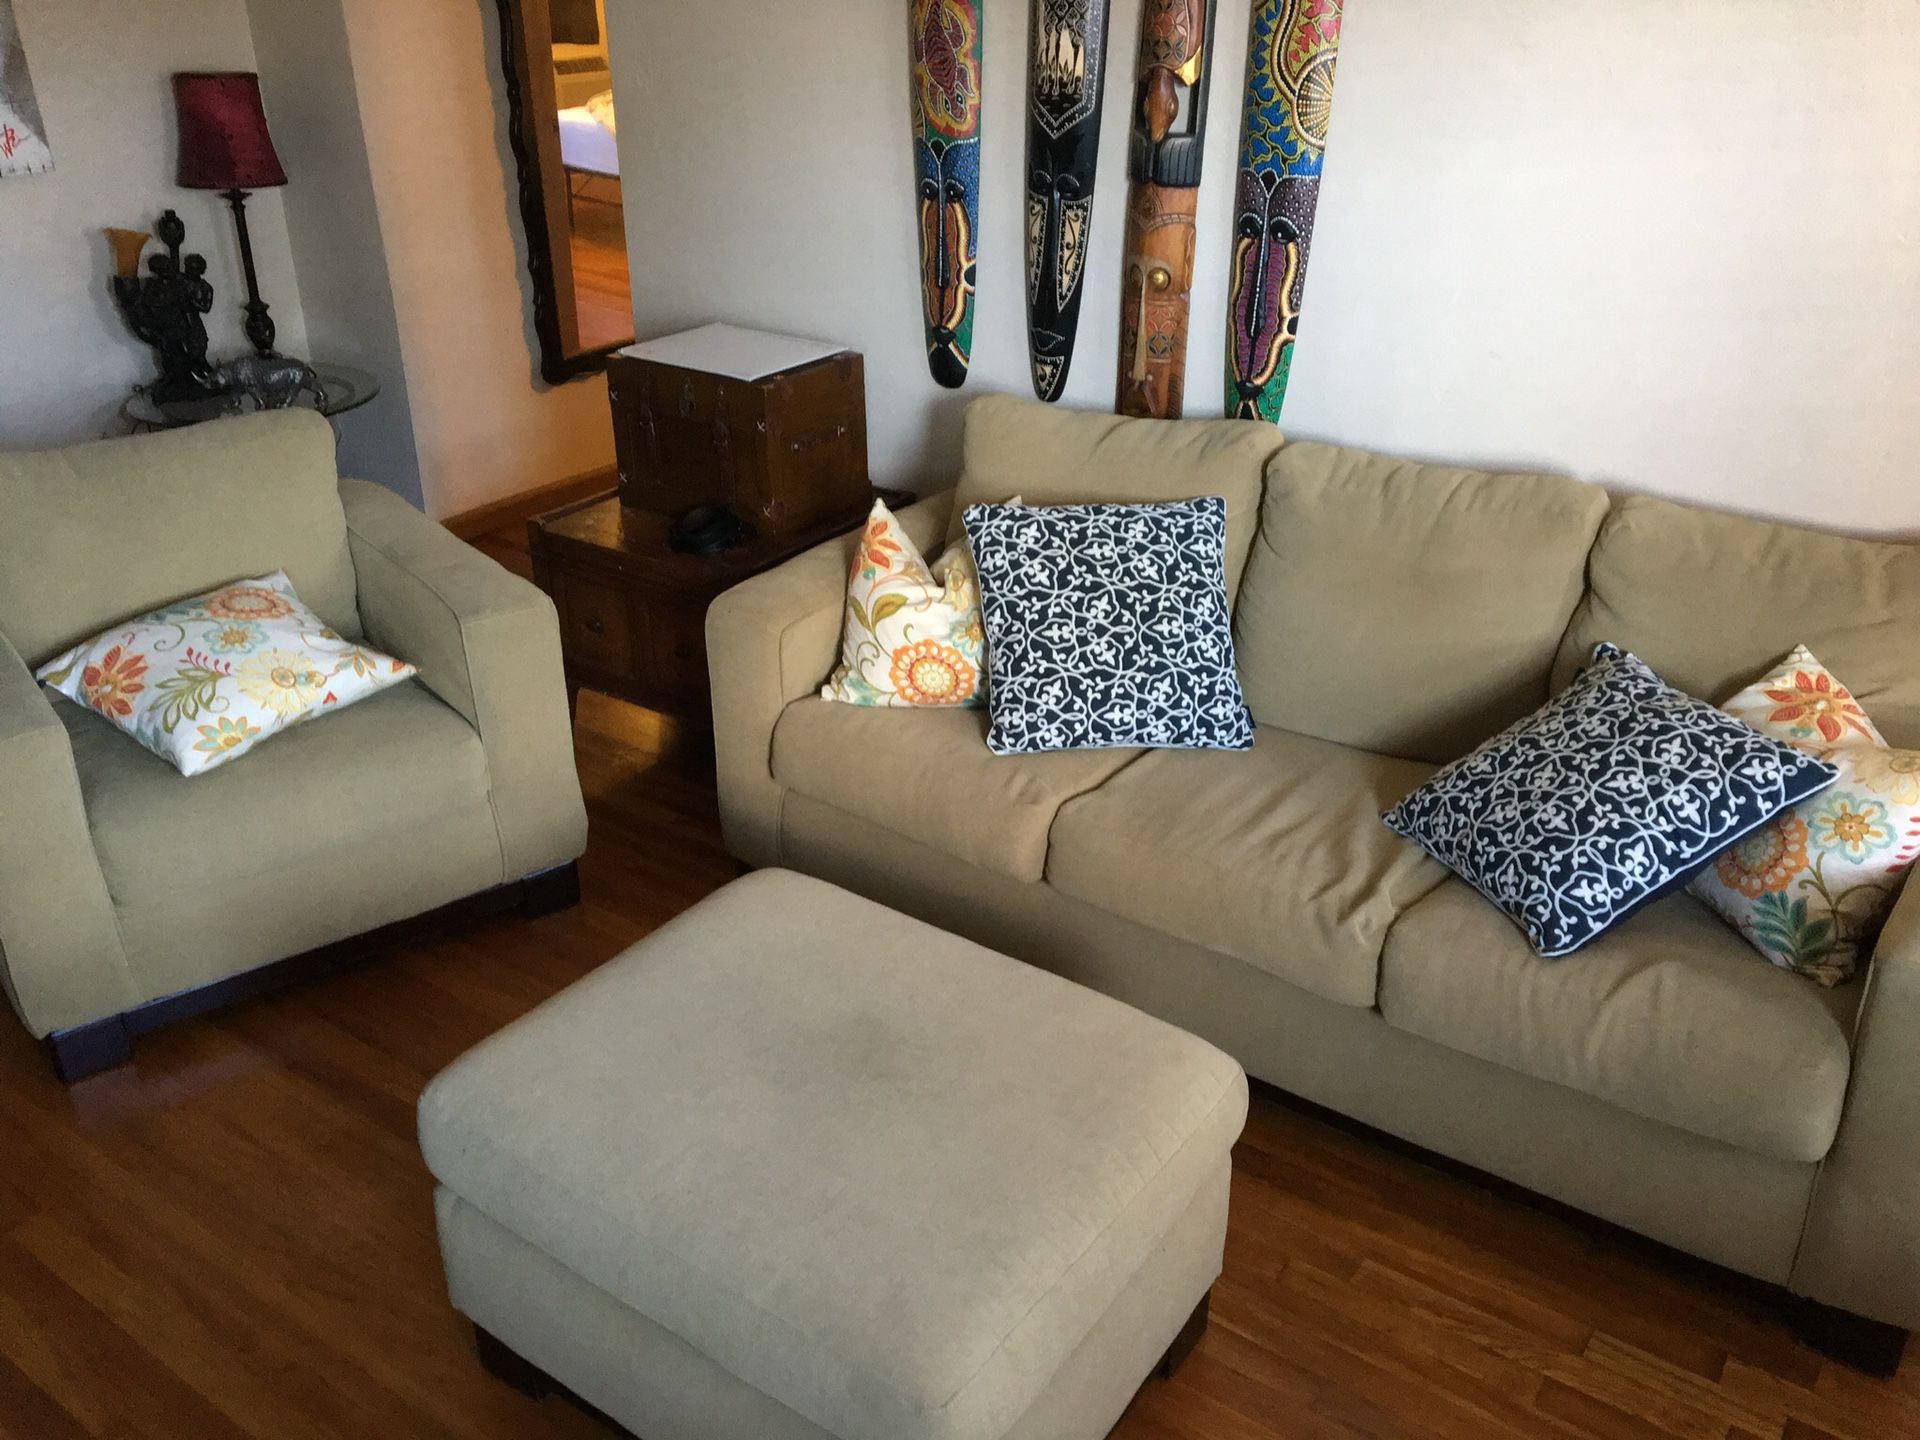 Complete sleeping couch with ottoman 3 pieces for sale